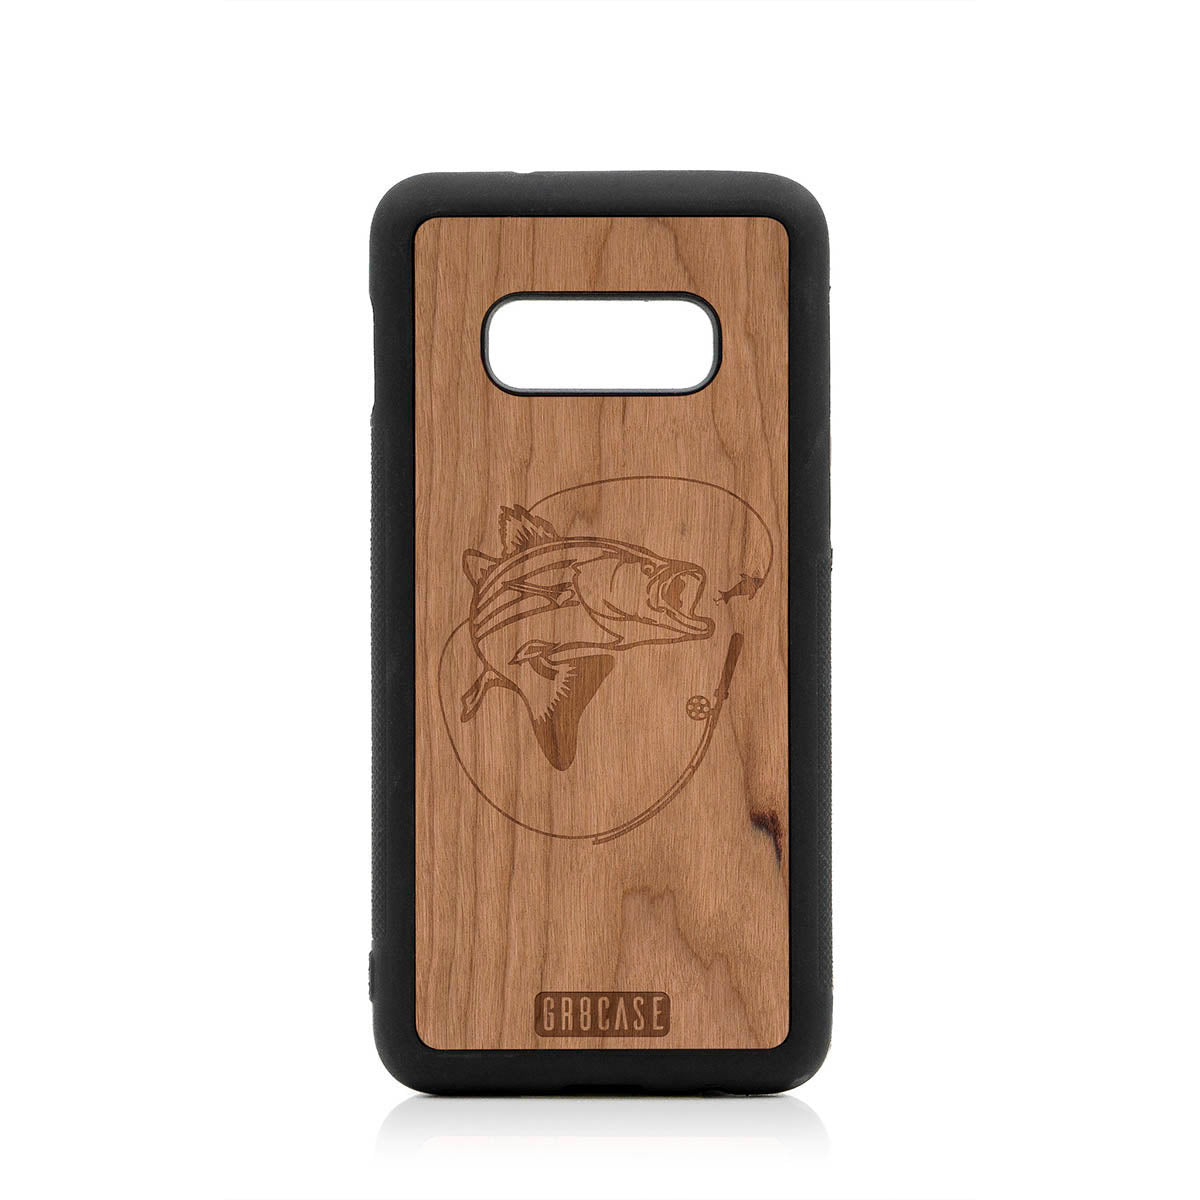 Fish and Reel Design Wood Case For Samsung Galaxy S10E by GR8CASE